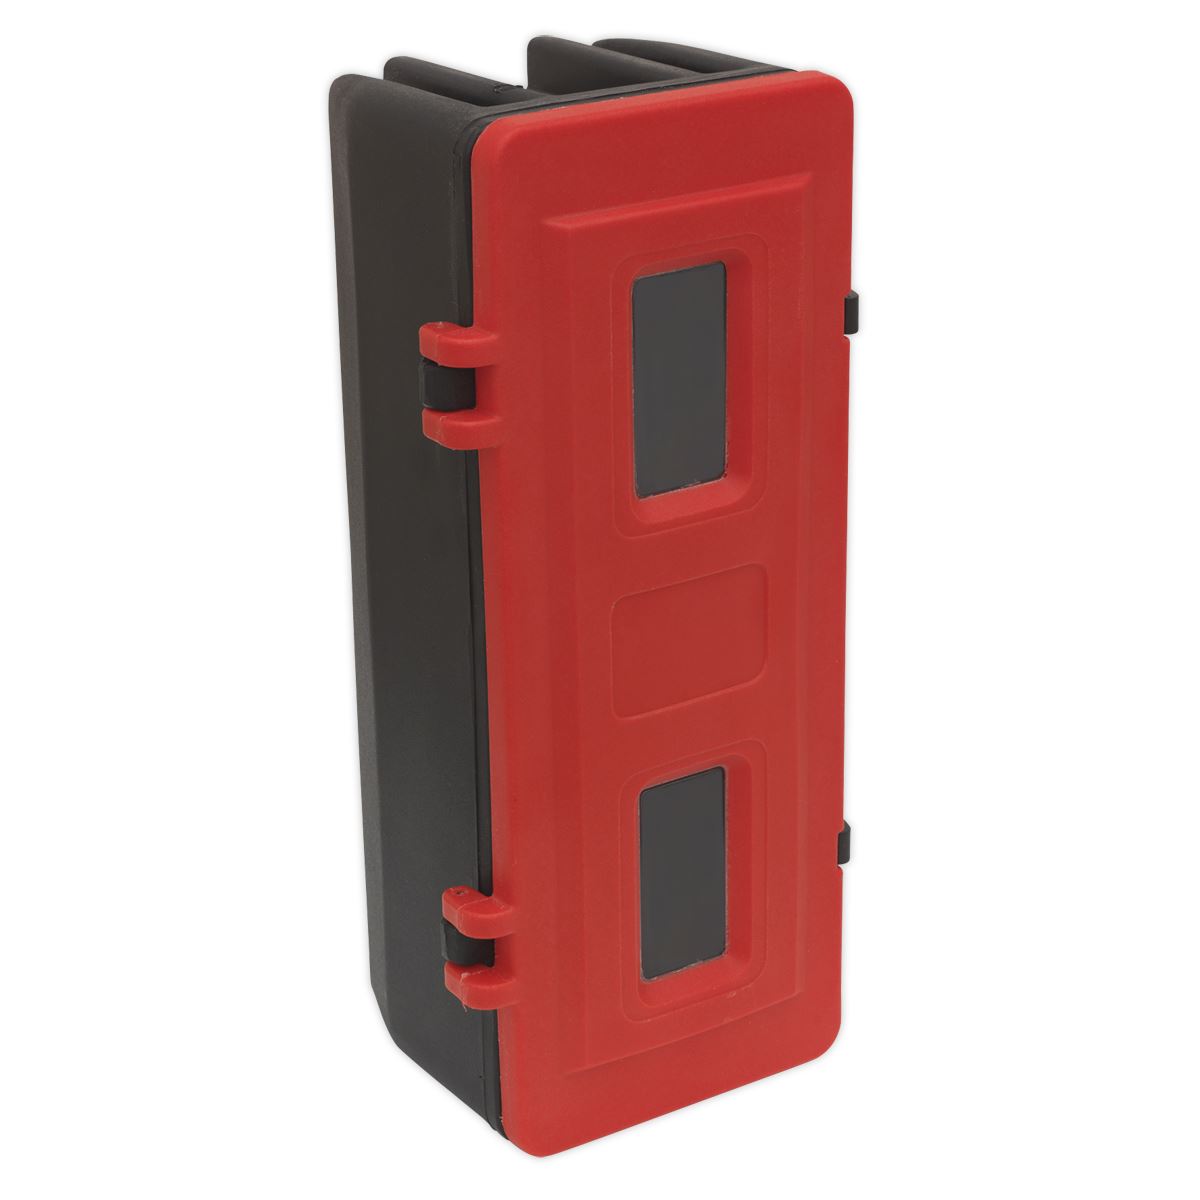 Sealey Fire Extinguisher Cabinet - Single